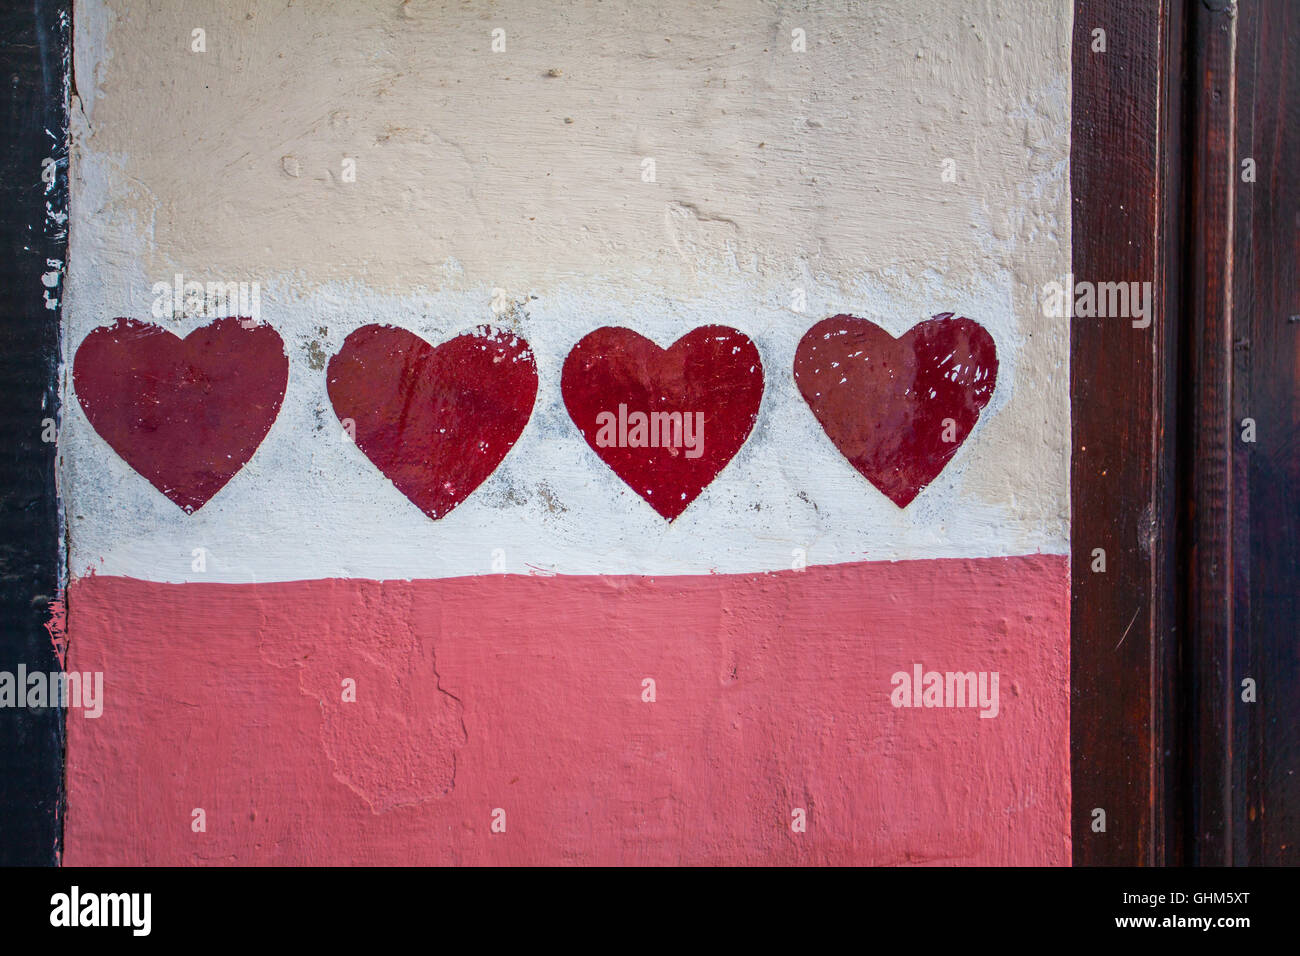 Red hearts painted on a colorful wall background Stock Photo